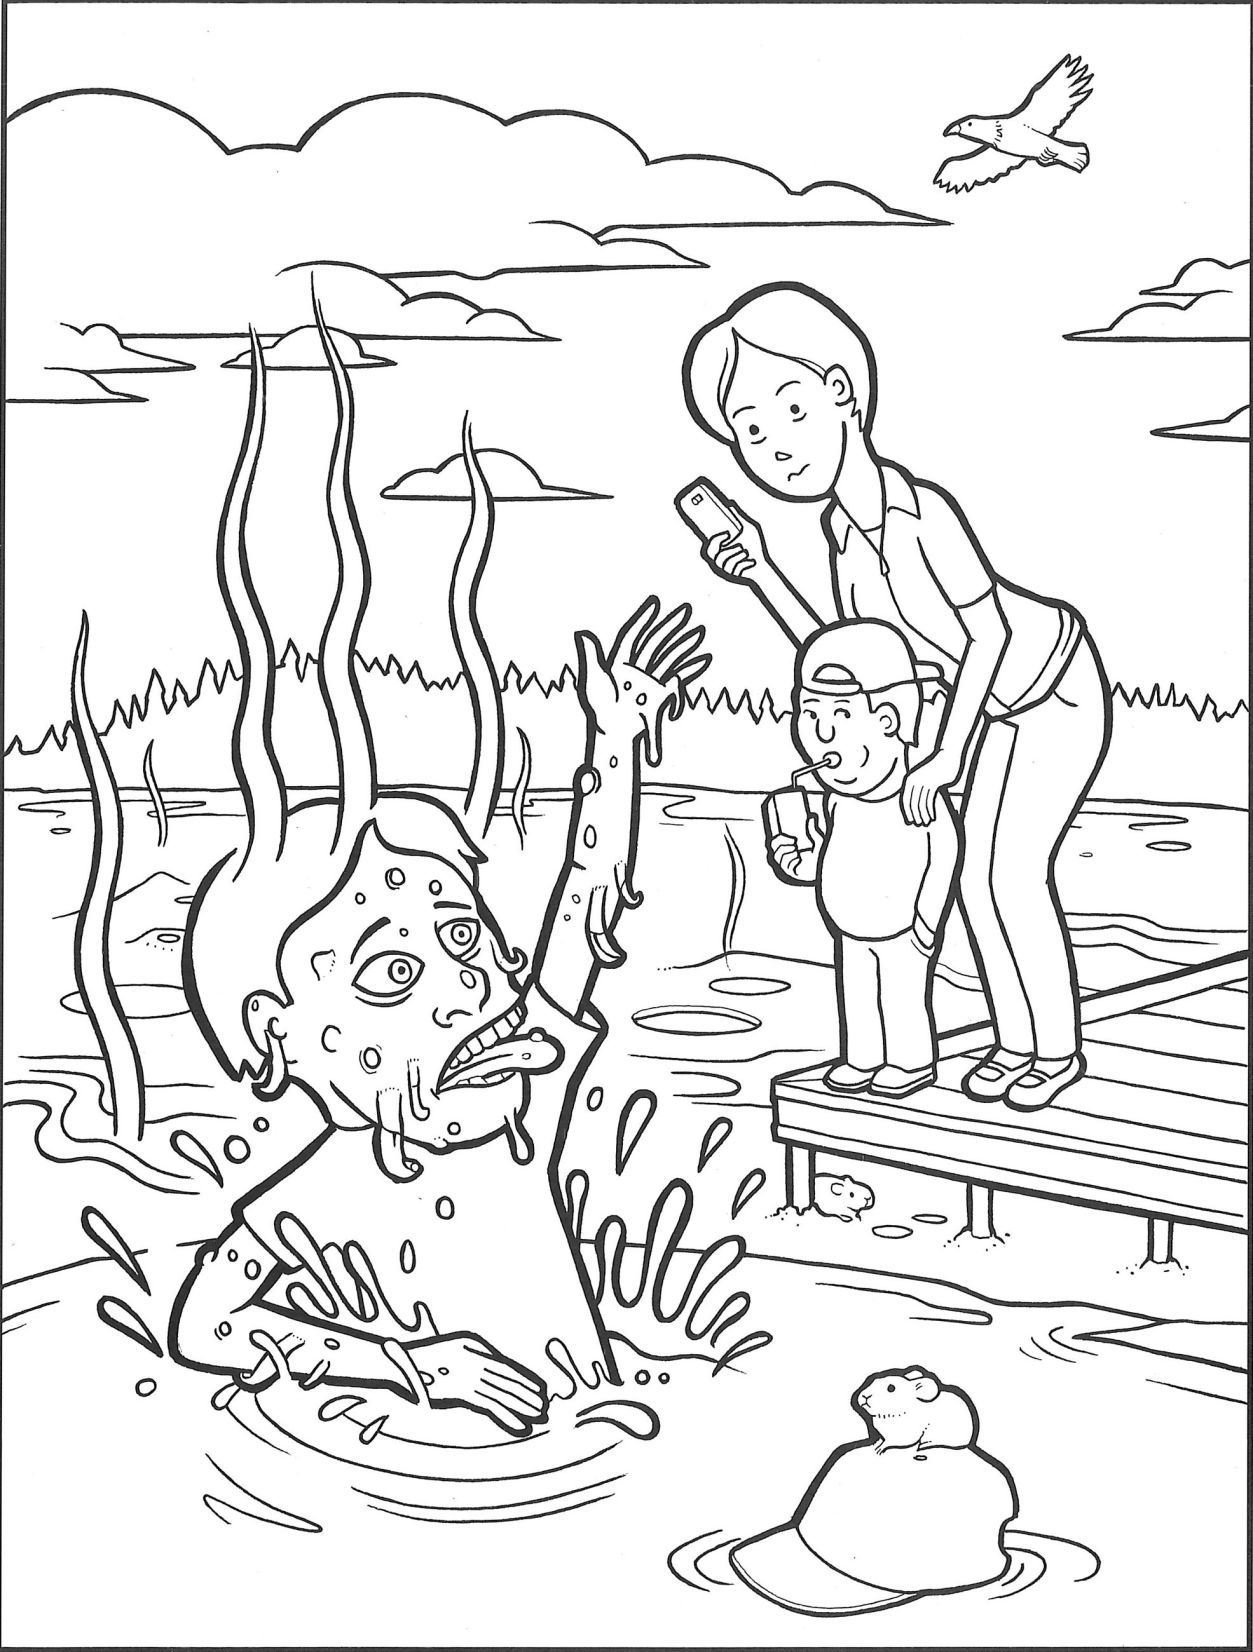 Yellowstone Book Coloring Pages